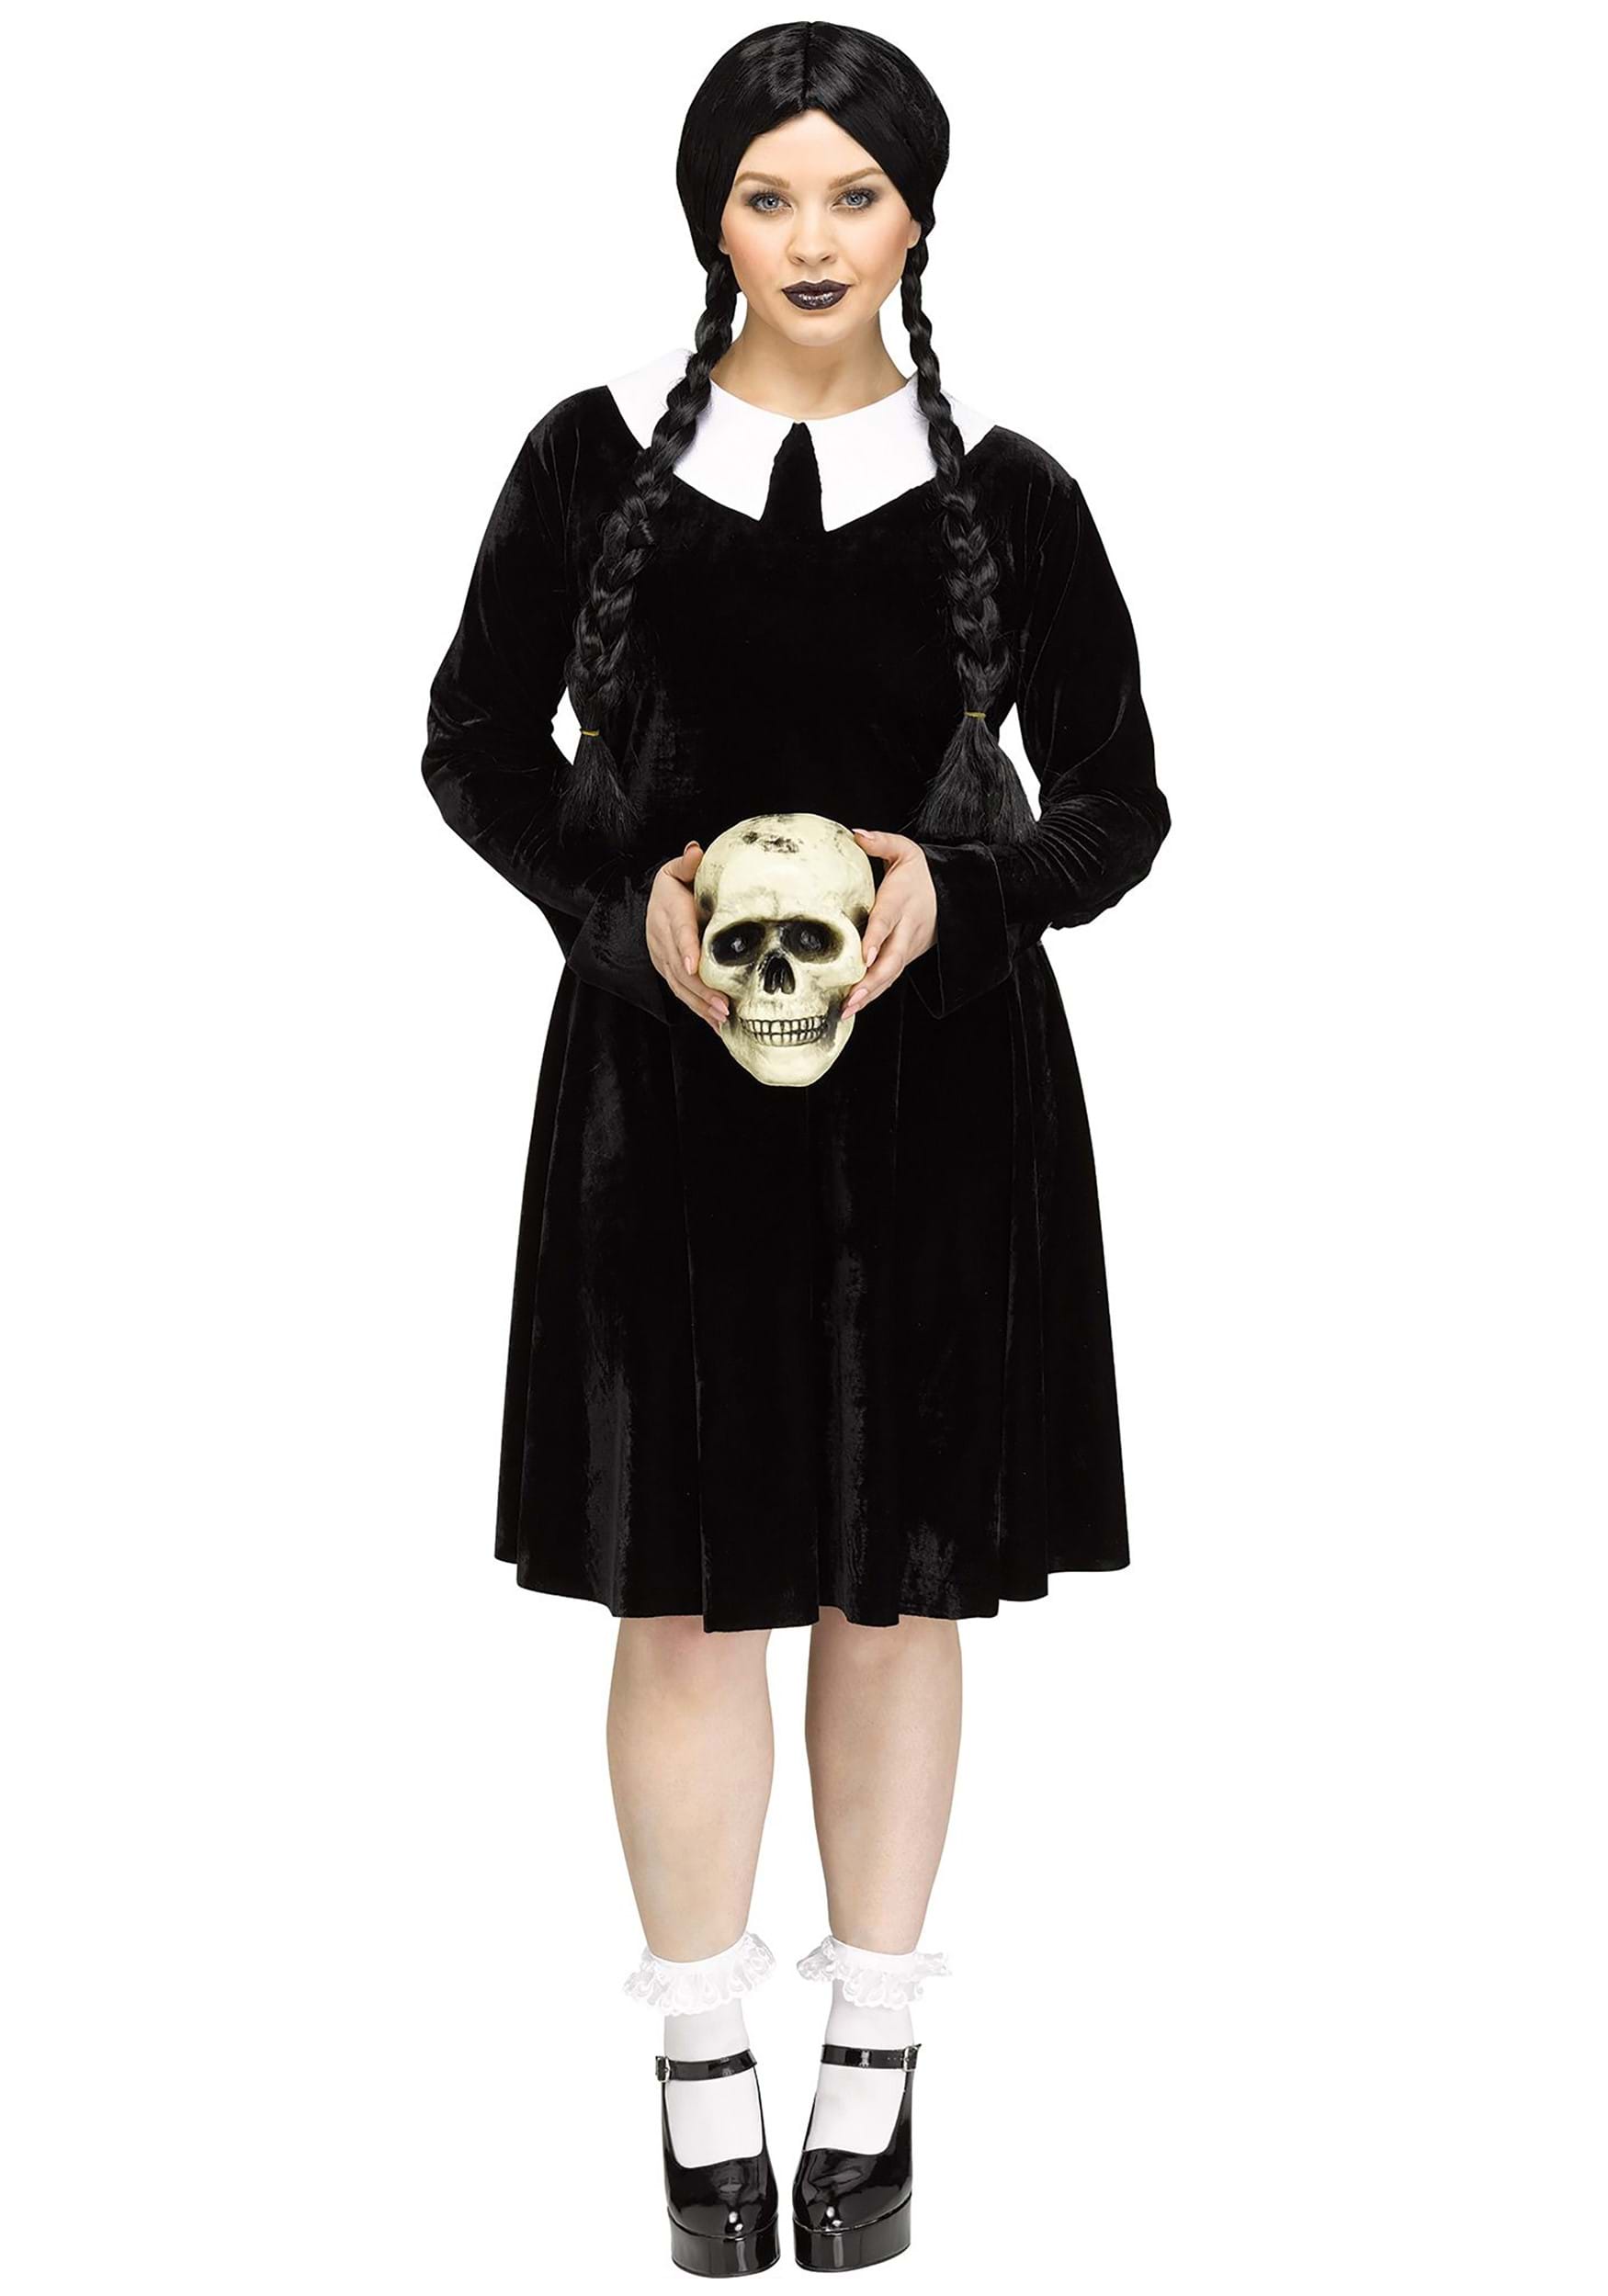 Plus Size Gothic Girl Costume for Women